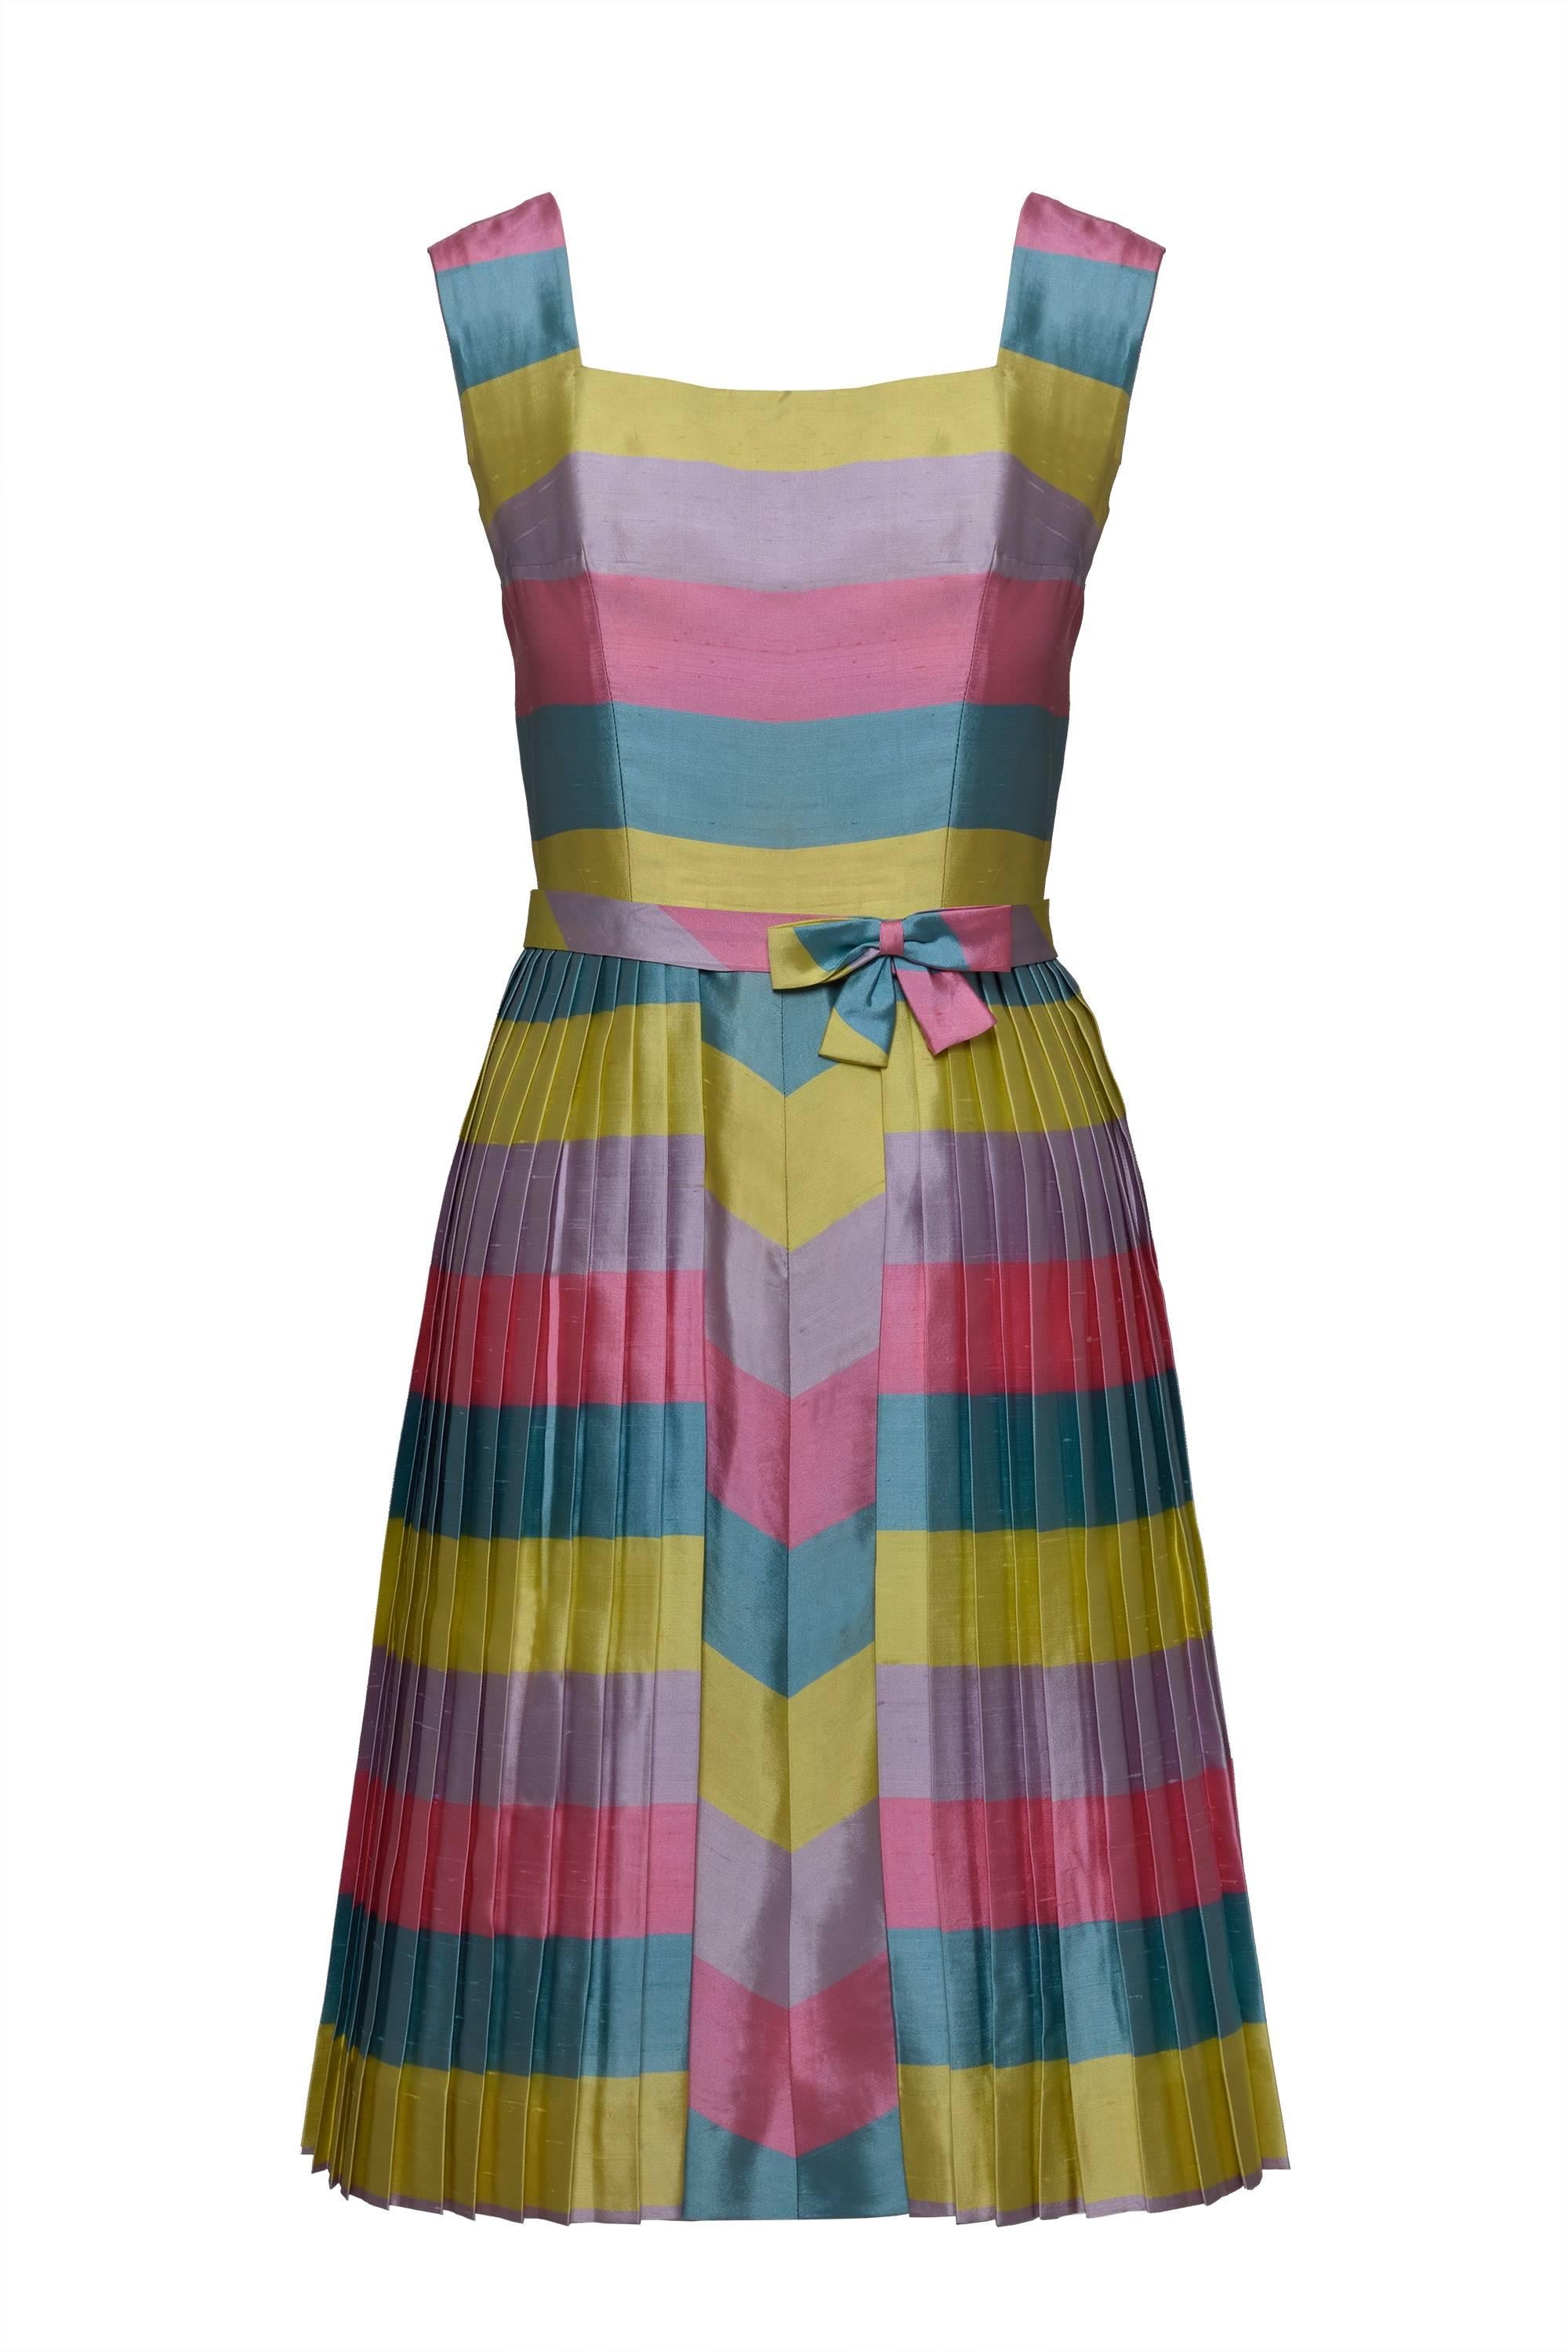 This gorgeous italian tailor 1950s cocktail dress with bolero jacket and belt is in pastel color striped print shantung fabric. The dress has back zip and hook and eye closure. The jacket has button closure and the belt has a bow with a hooks and